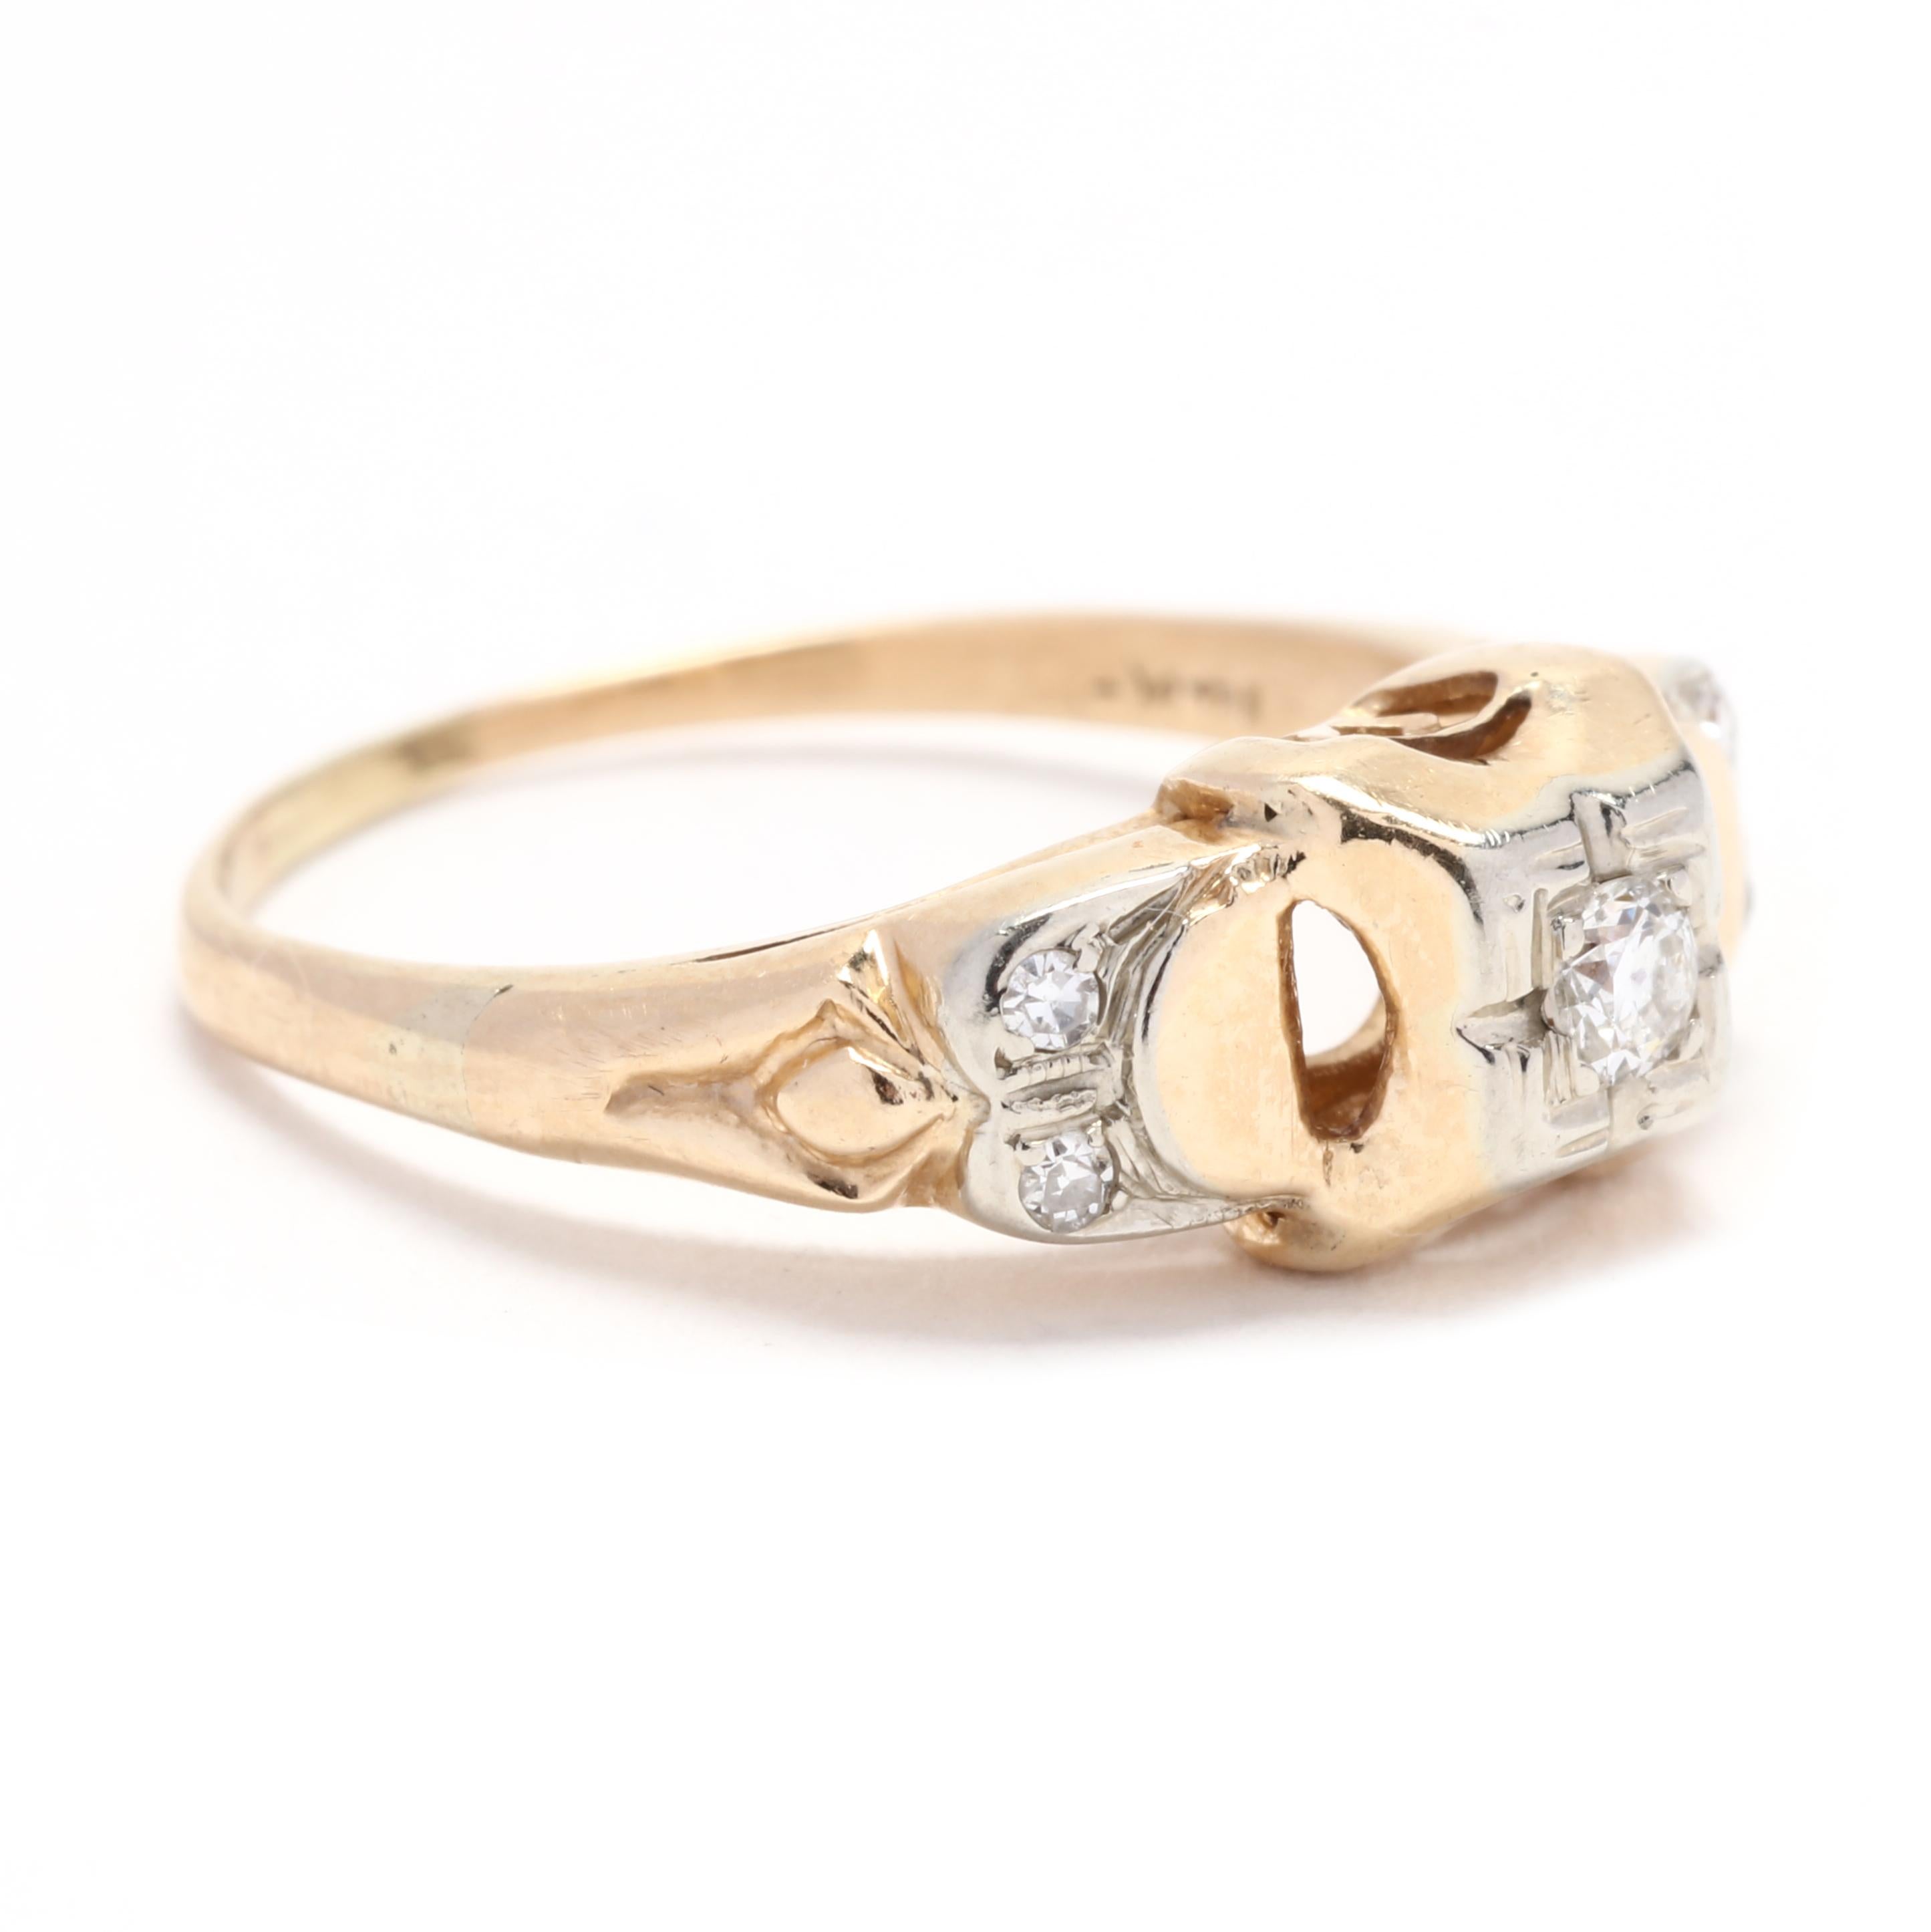 This dainty and elegant diamond wedding band is the perfect choice for a retro-inspired engagement ring or stackable ring set. Made with 14K yellow gold, this ring features a thin band with a total carat weight of 0.08. The diamonds are round cut